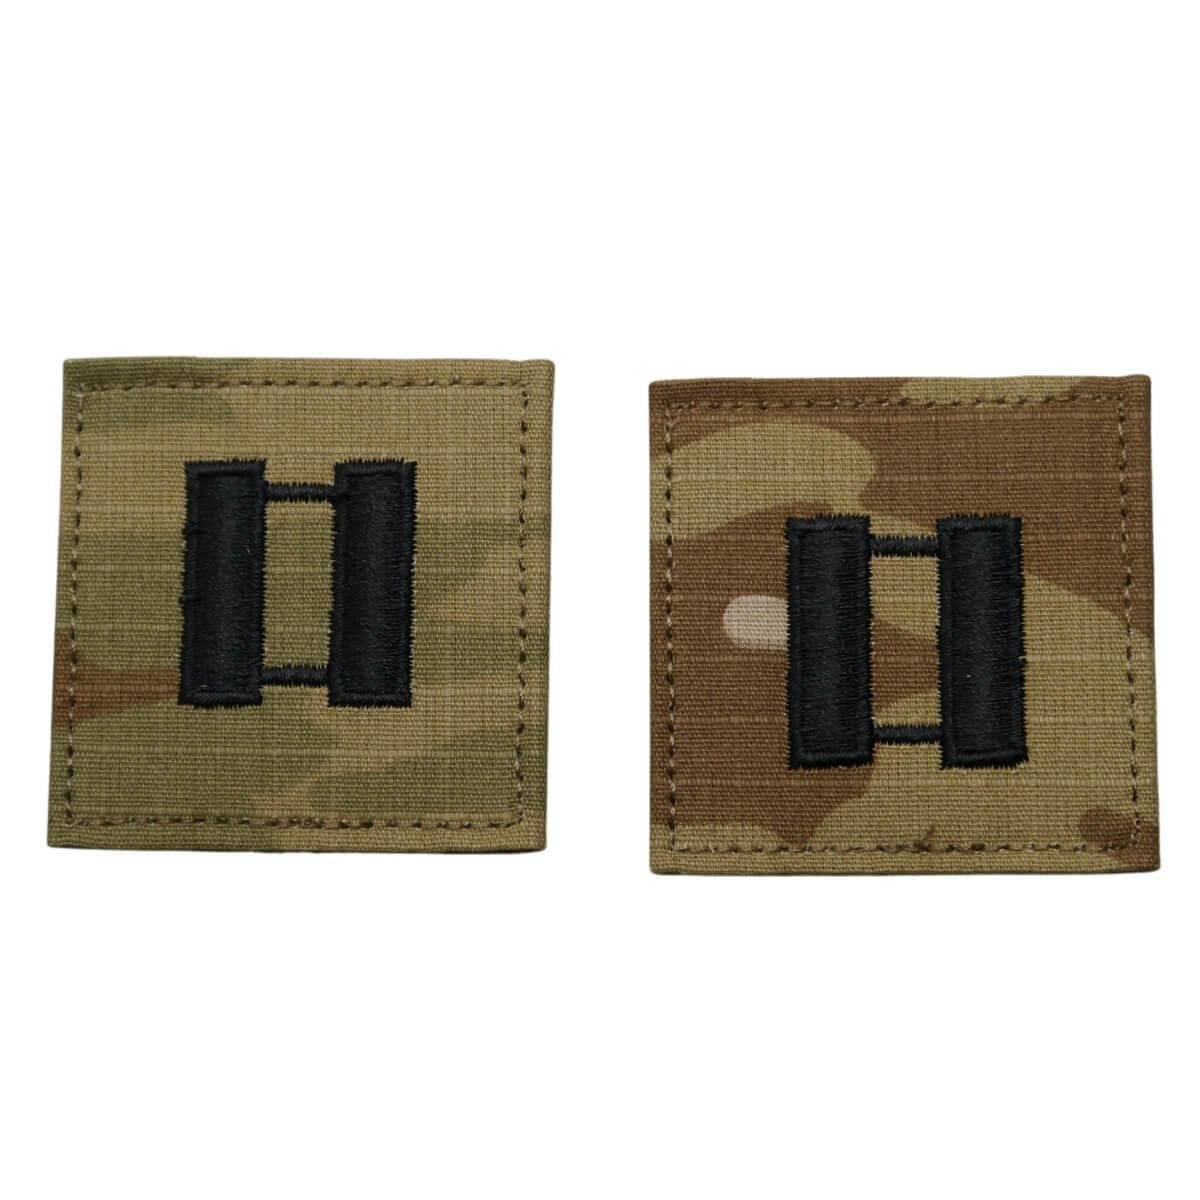 CPT Captain Army Rank OCP Patch Set of 2